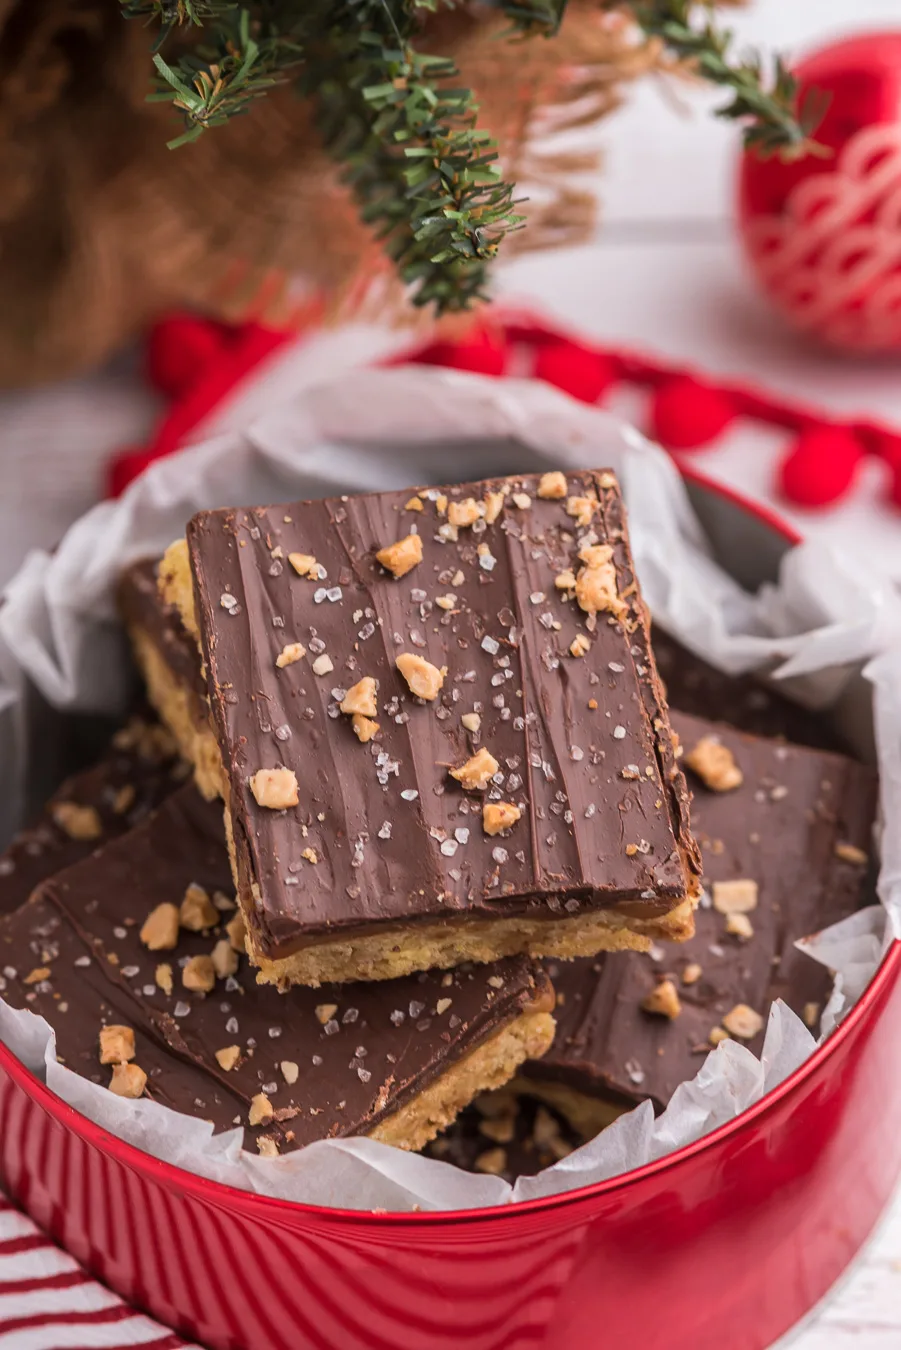 chocolate covered caramel bars topped with toffee bits and sea salt. bar stacked into a red Christmas tin. table top Christmas tree and red ornament in background